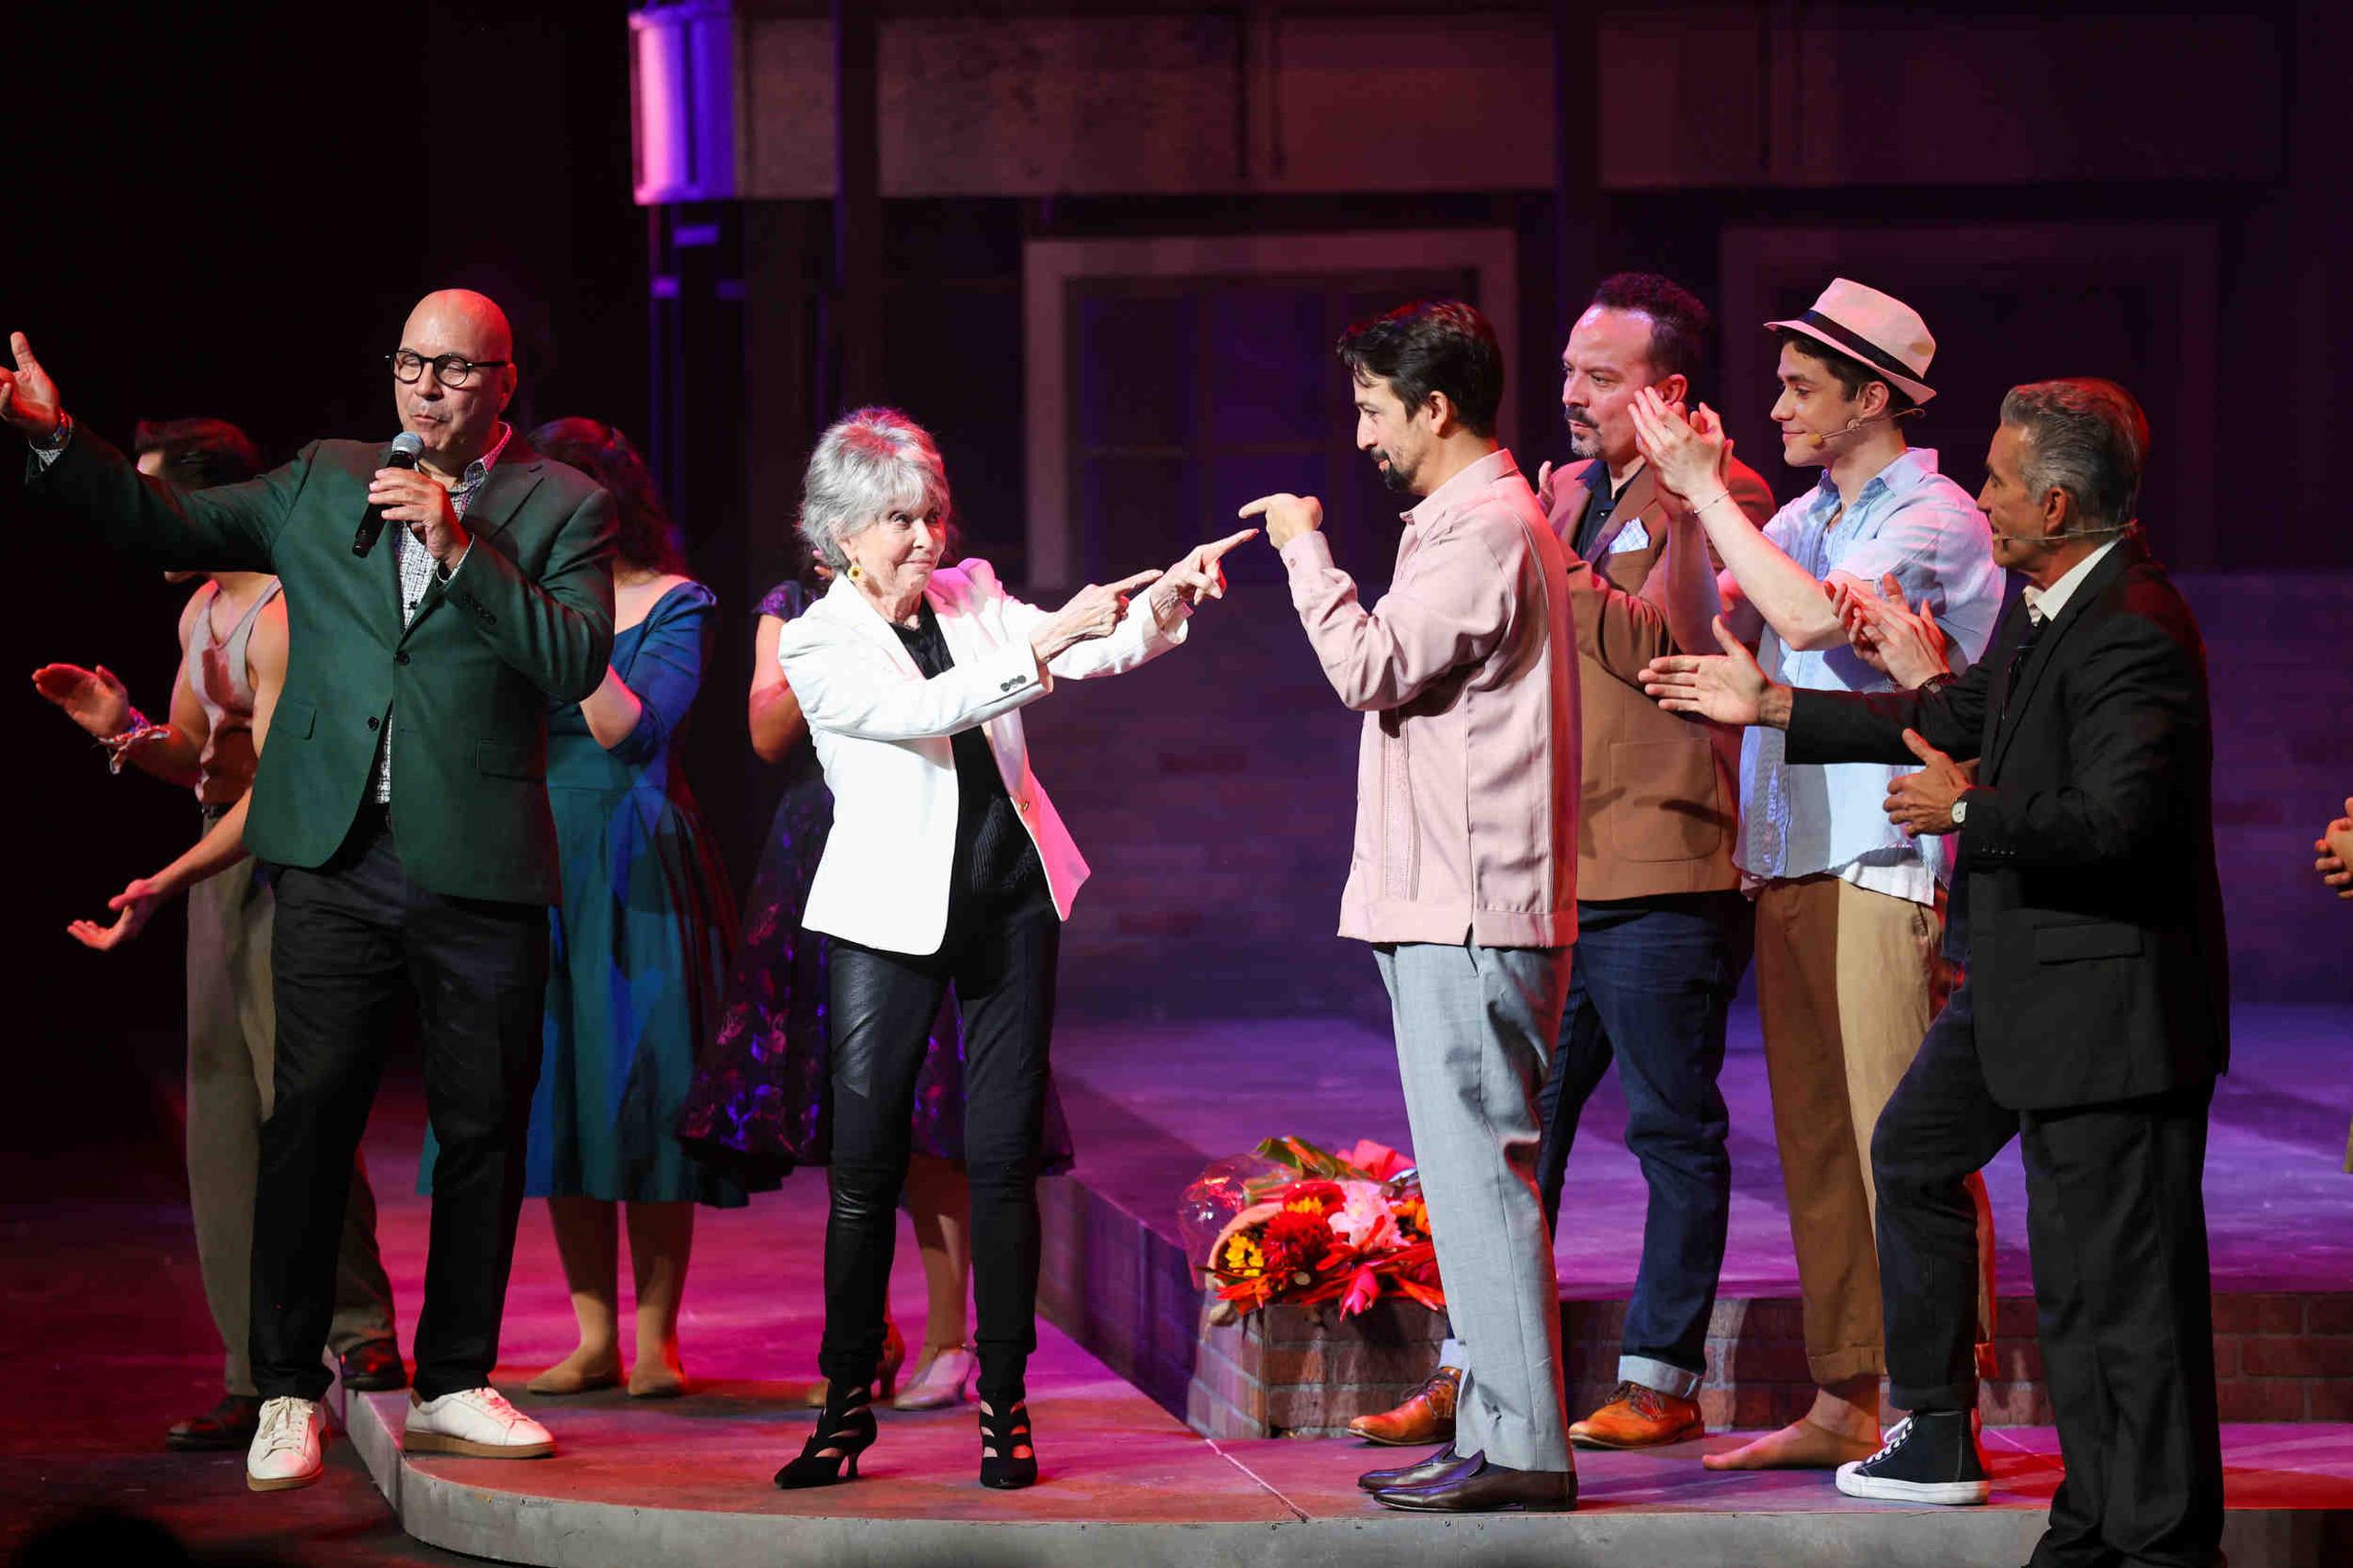 Rita Moreno, represented by producer Ender Vega and his friend, playwright and actor Lin-Manuel Miranda, expressed to the audience the pride she feels in being part of a stage production in her honor.